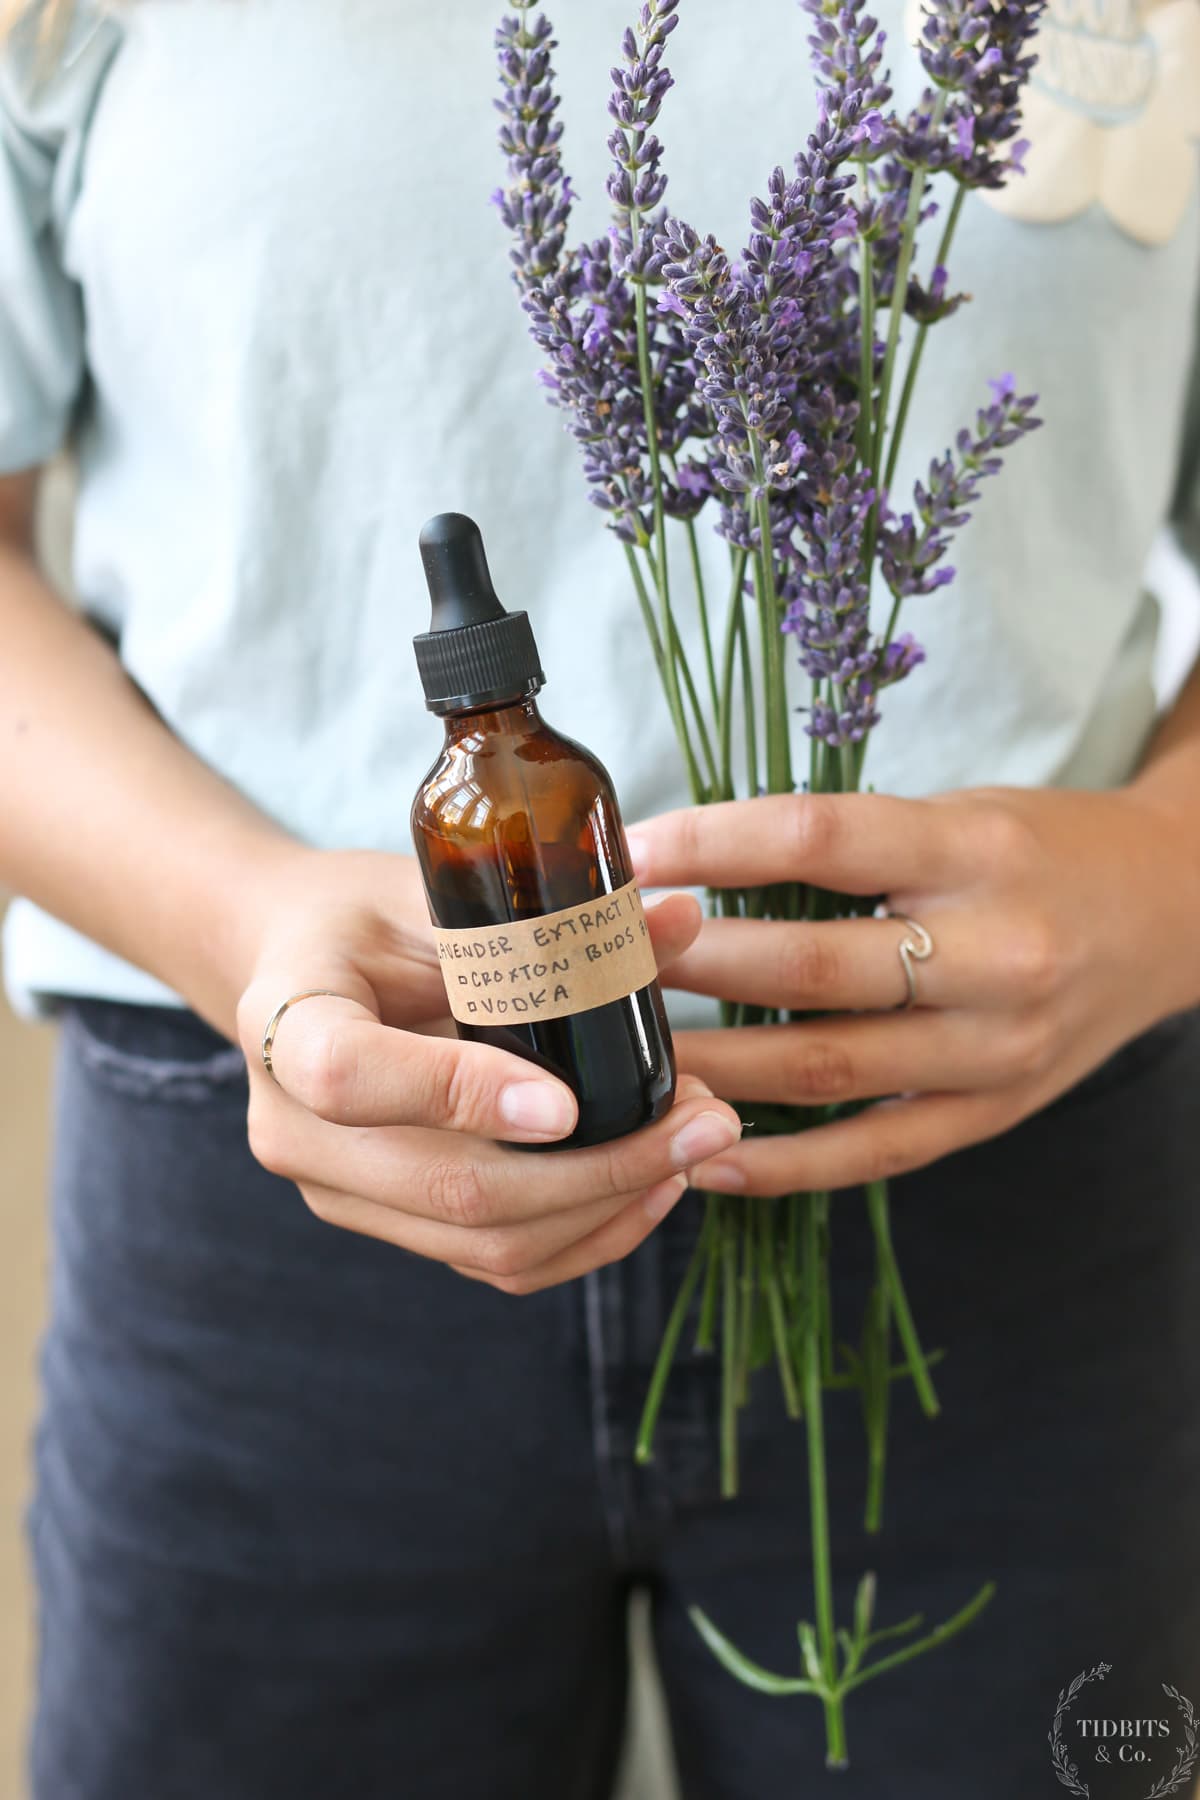 A girl holds a bottle of lavender extract and some lavender flowers